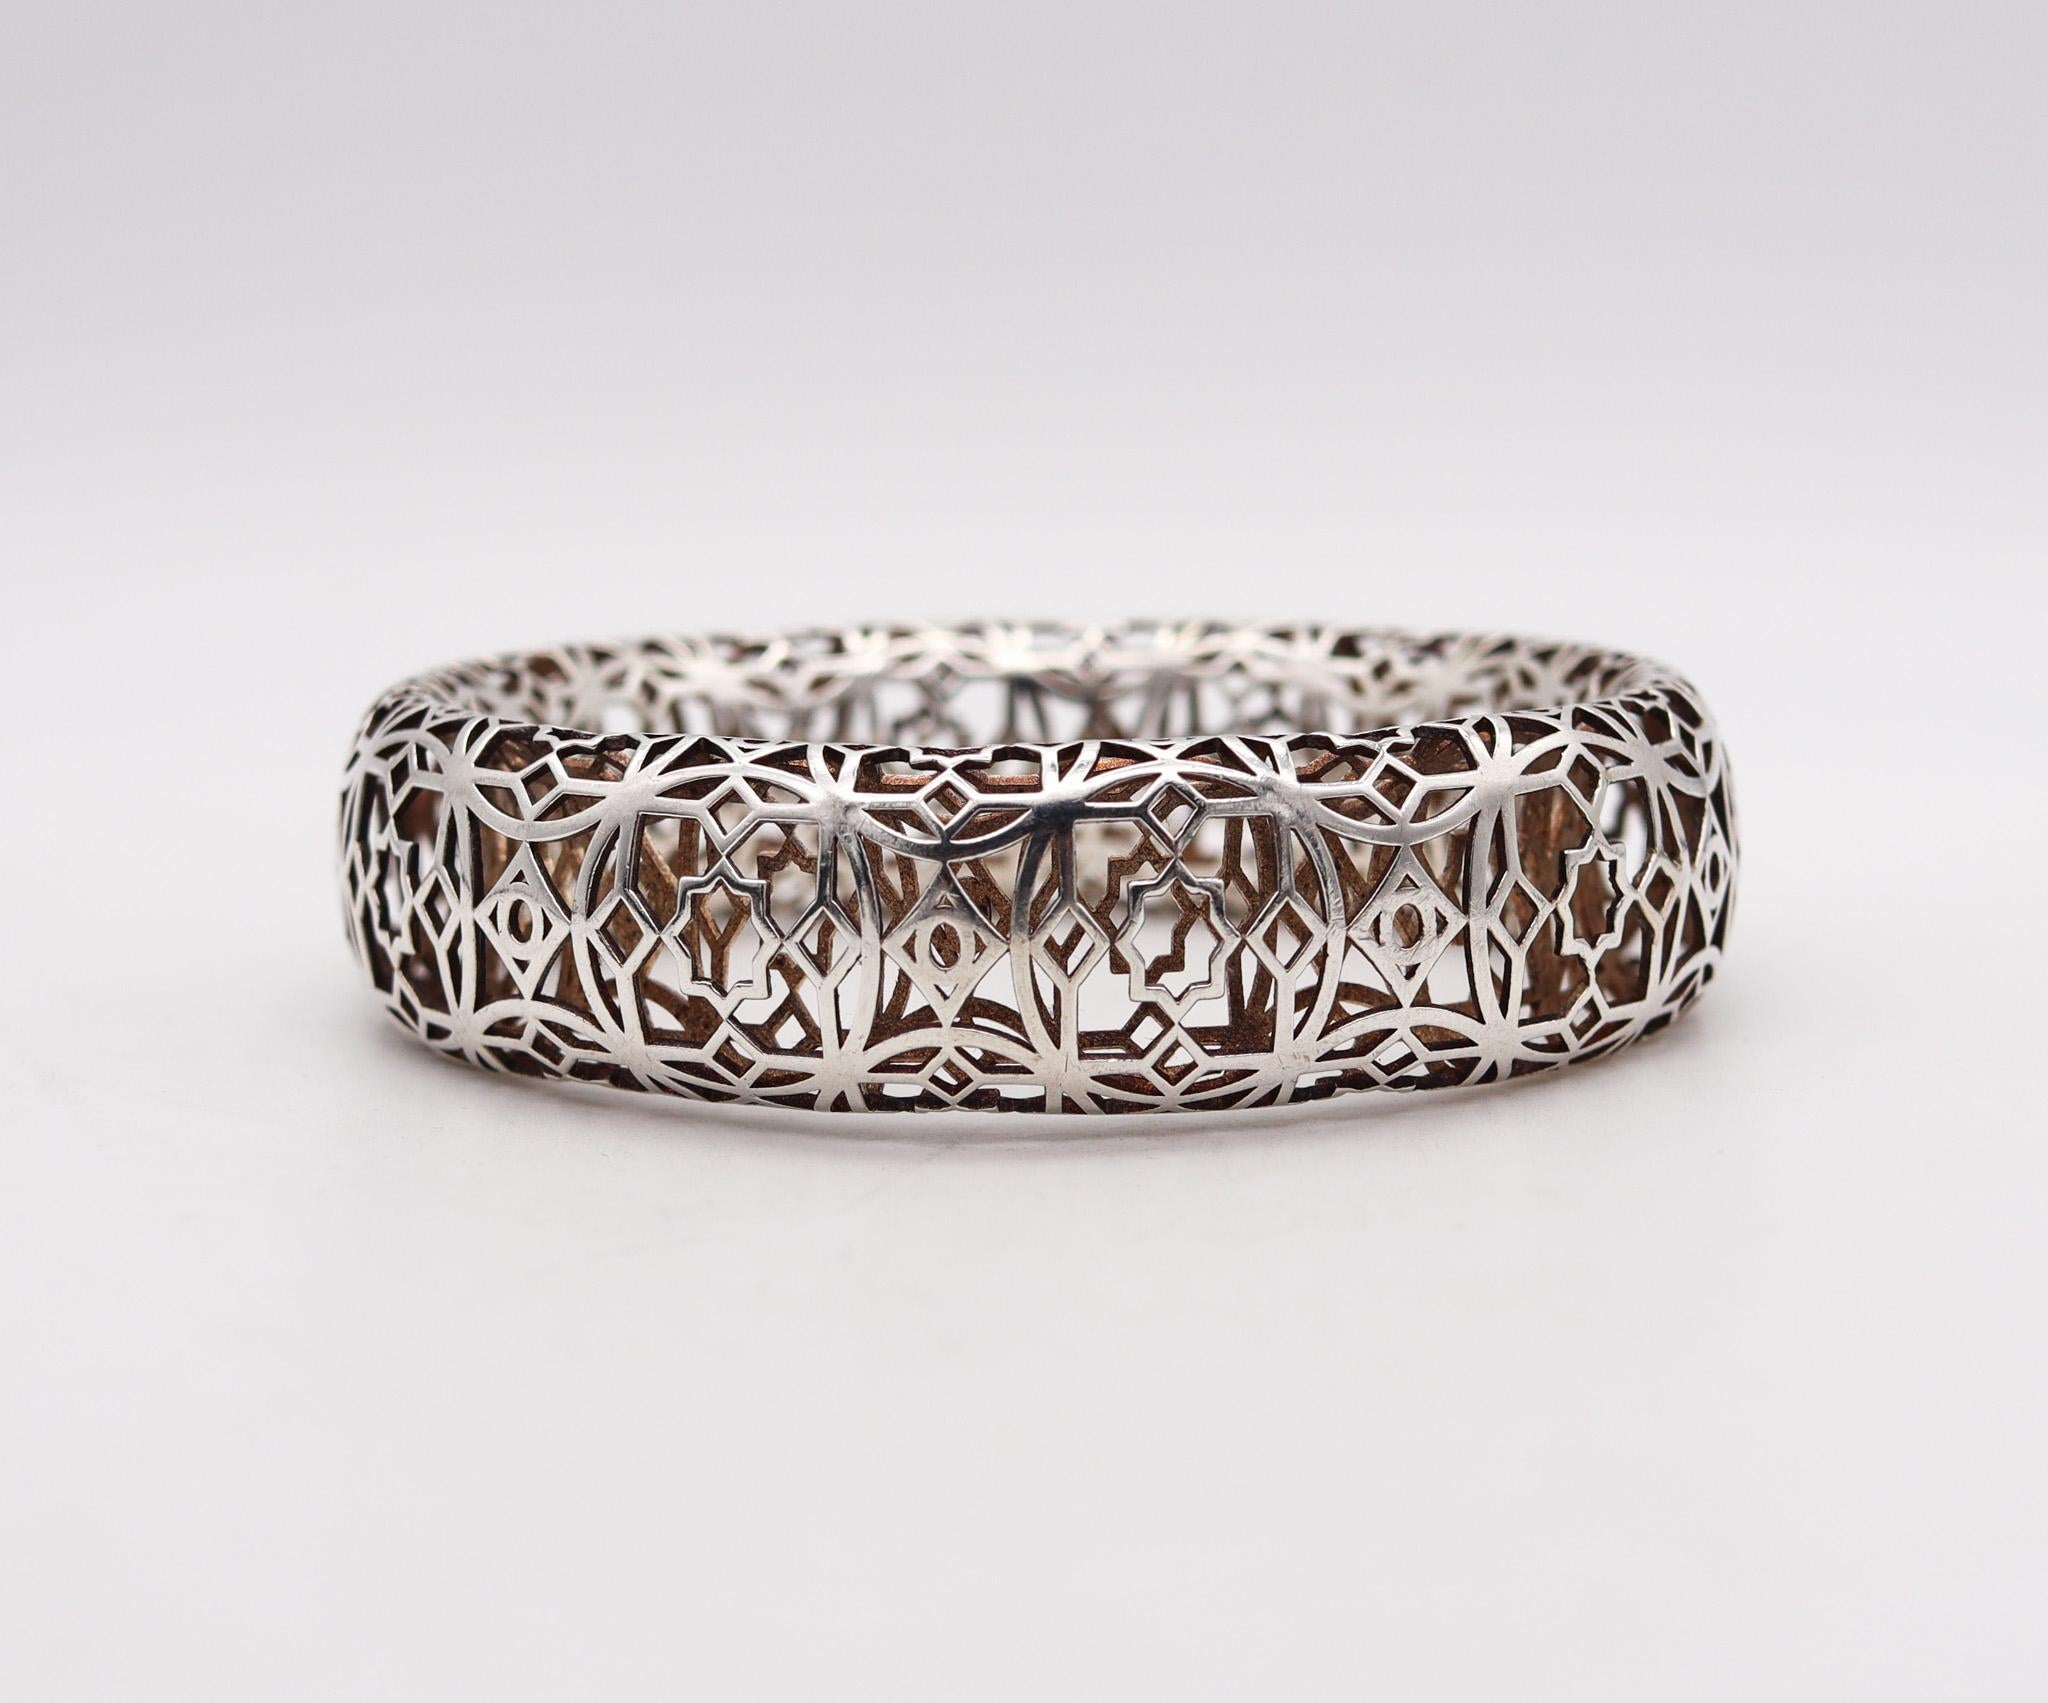 Tiffany & Co. Paloma Picasso Marrakesh Bangle Bracelet In .925 Sterling Silver In Excellent Condition For Sale In Miami, FL